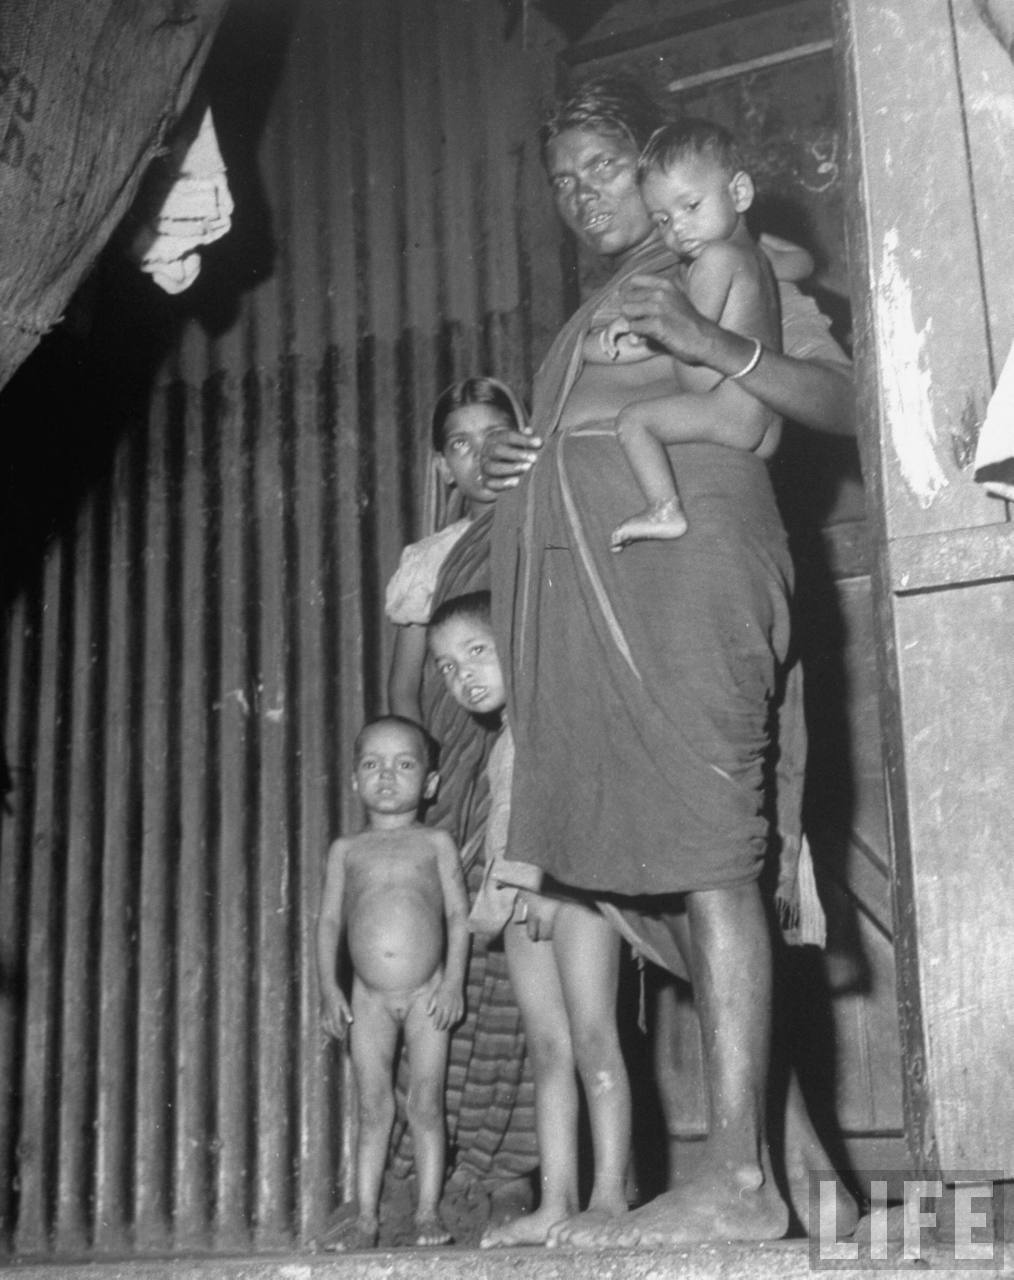 Indian mother with her children in their quarter in the poor section of the city - Bombay (Mumbai) 1946